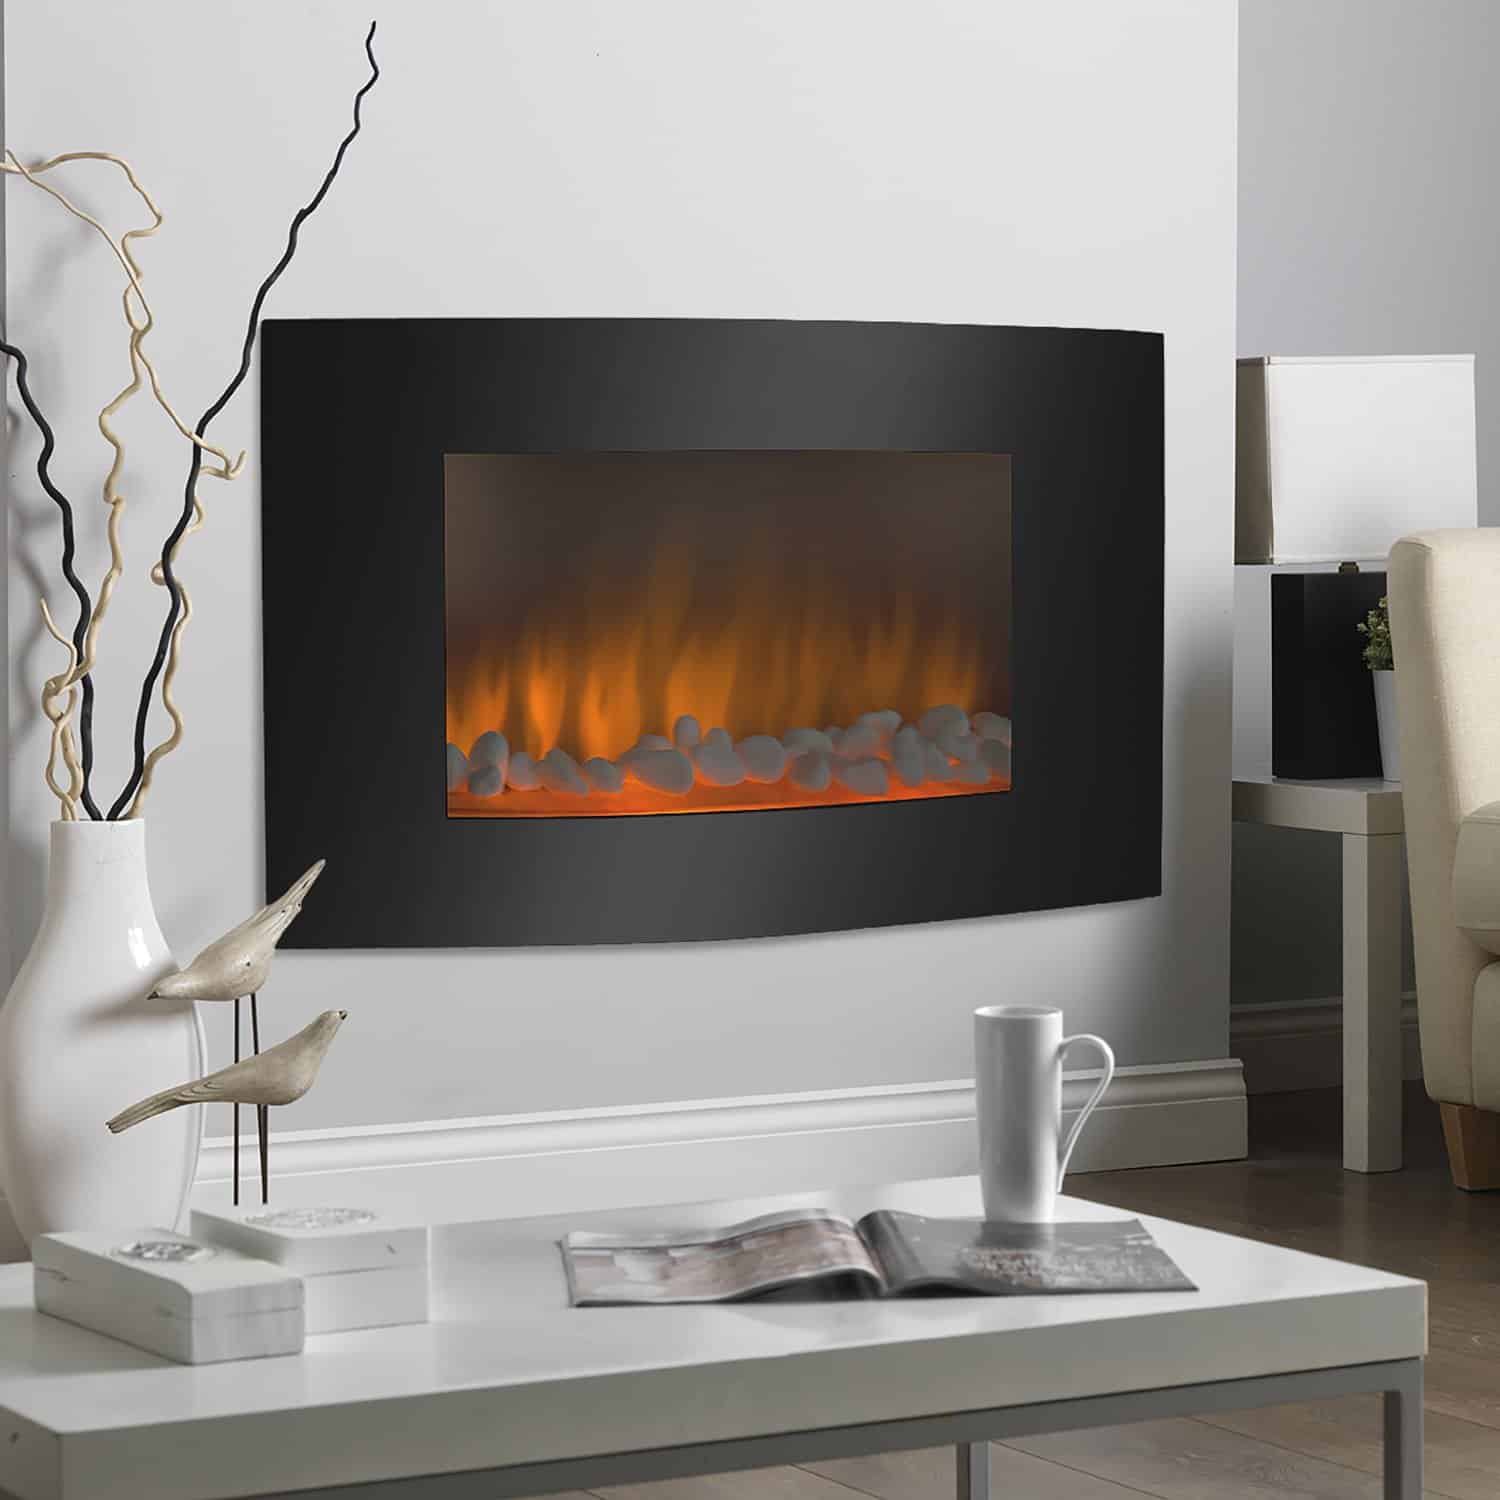 Ethanol Fireplace Inserts, Insert Electric Fireplace In Wall